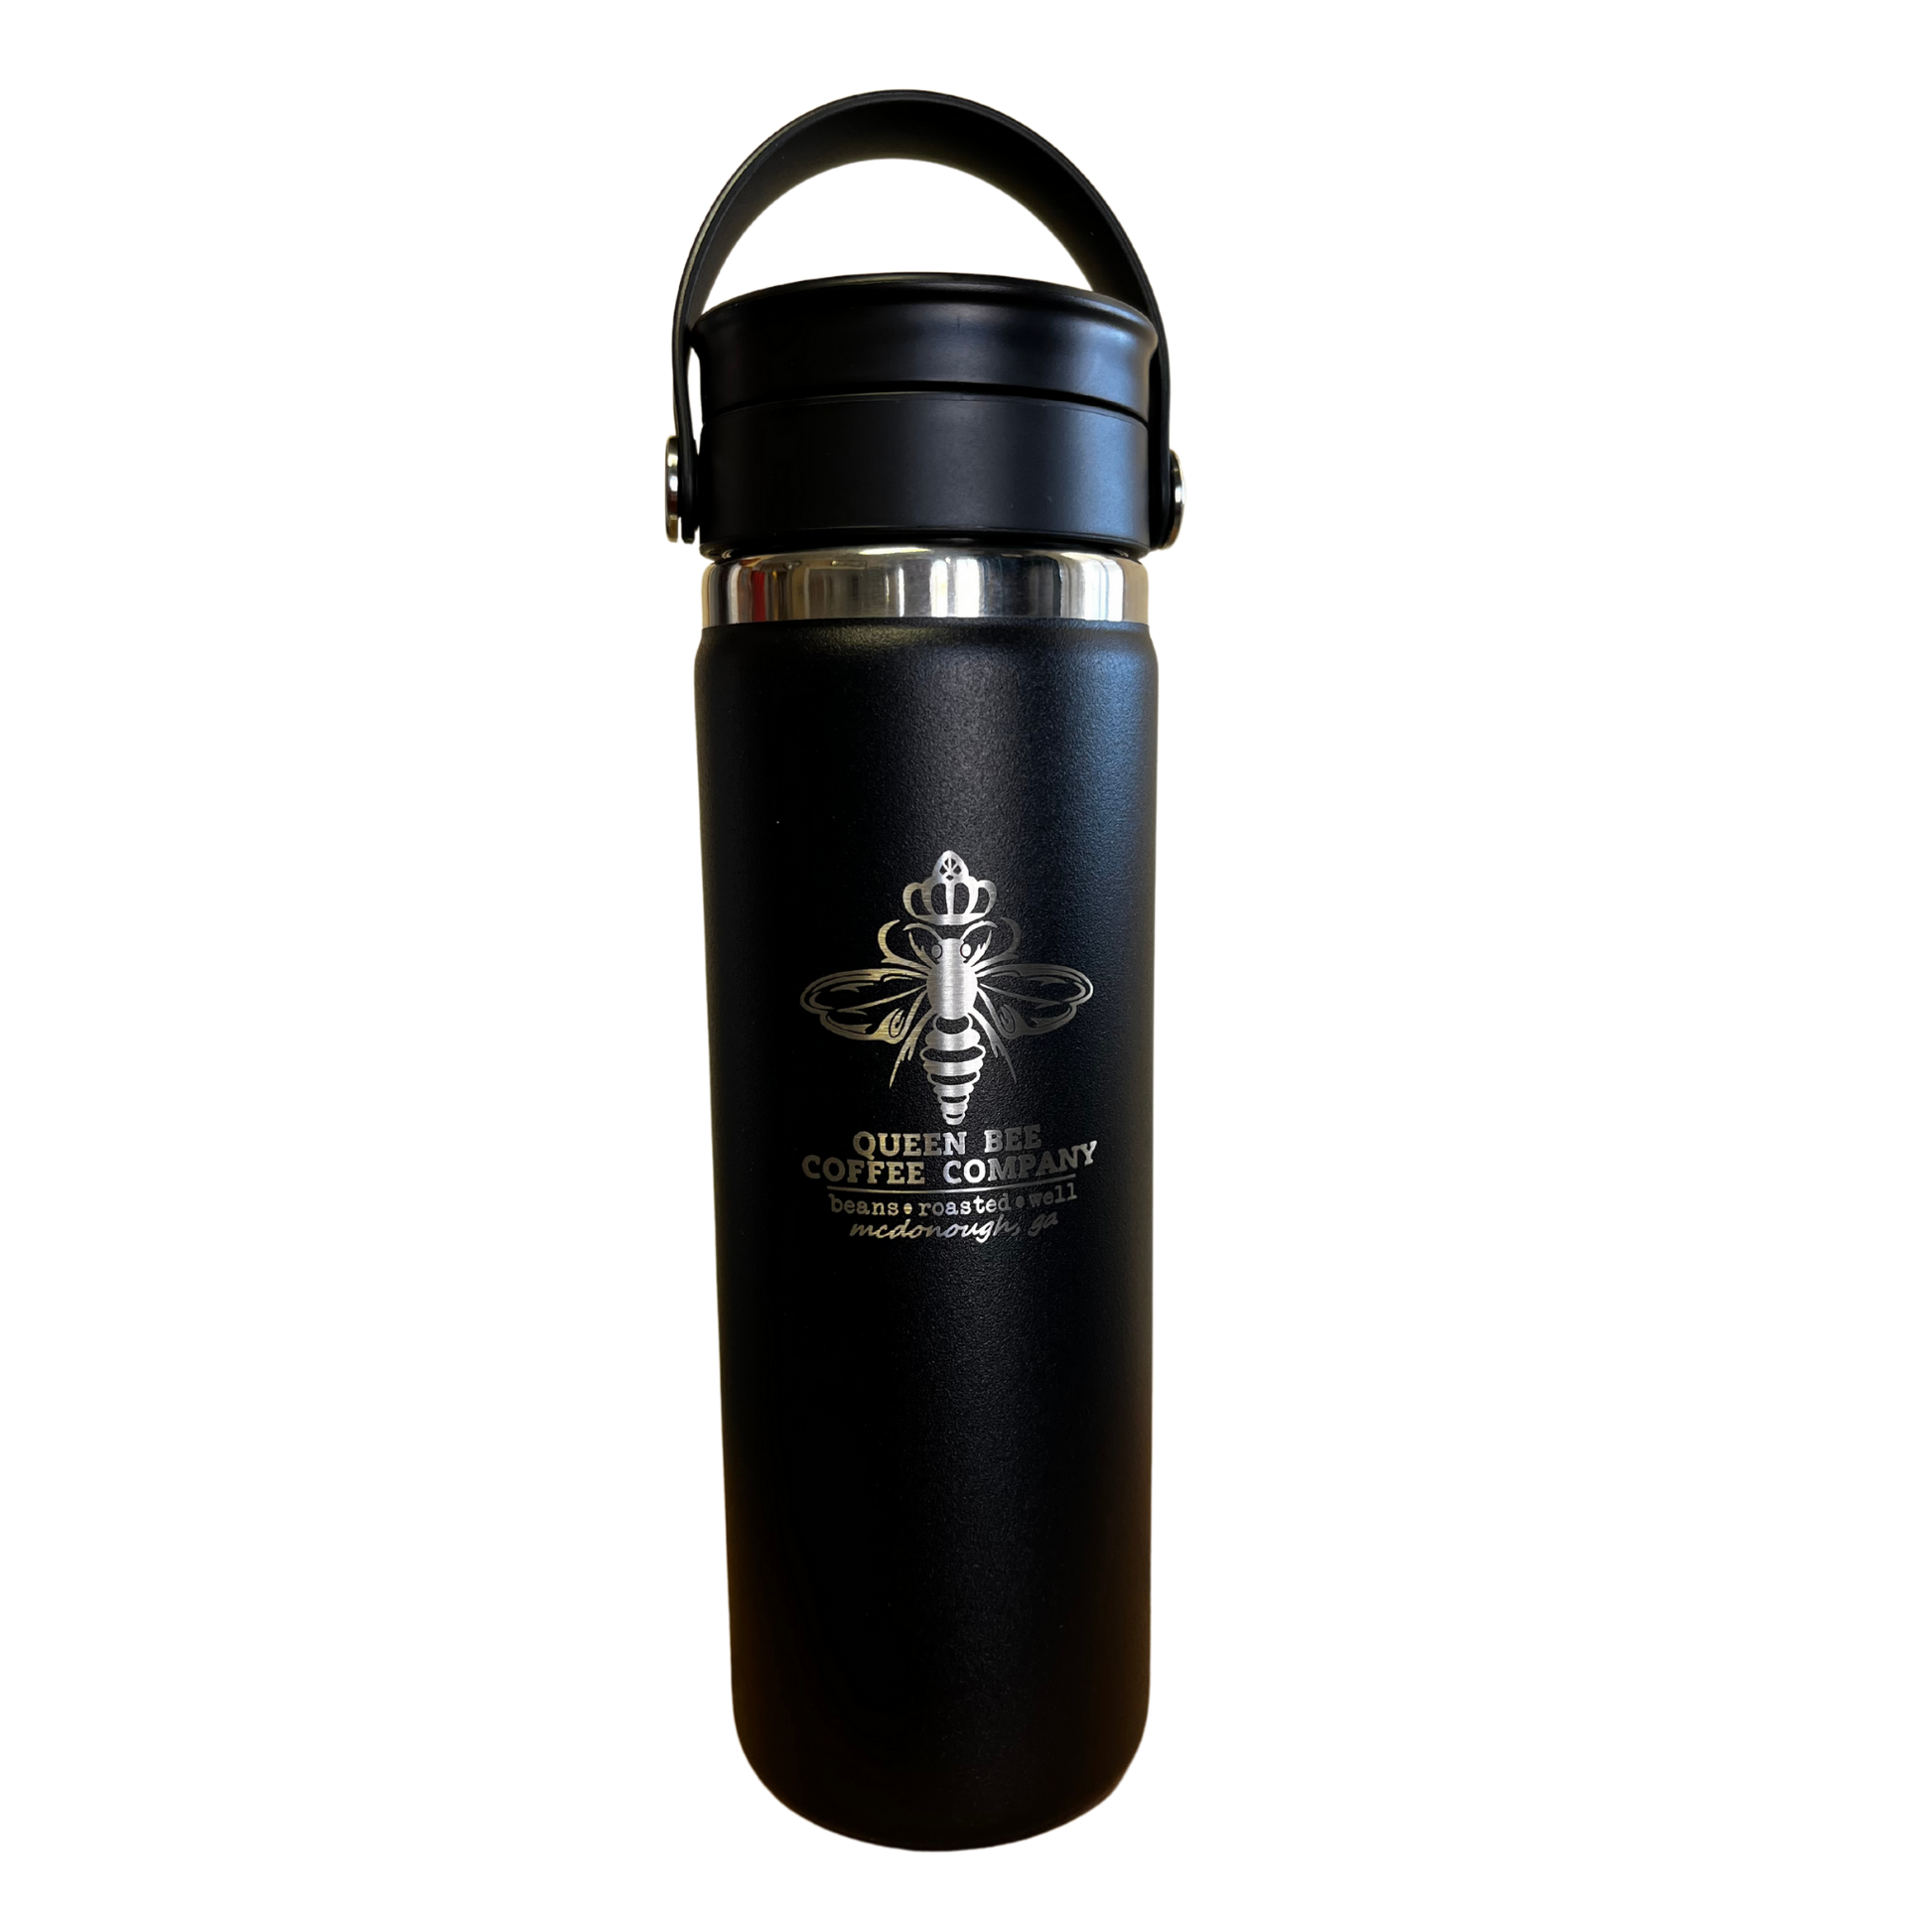 Thermos Vacuum Insulated Products - Keep Drinks Hot/Cold For Up To